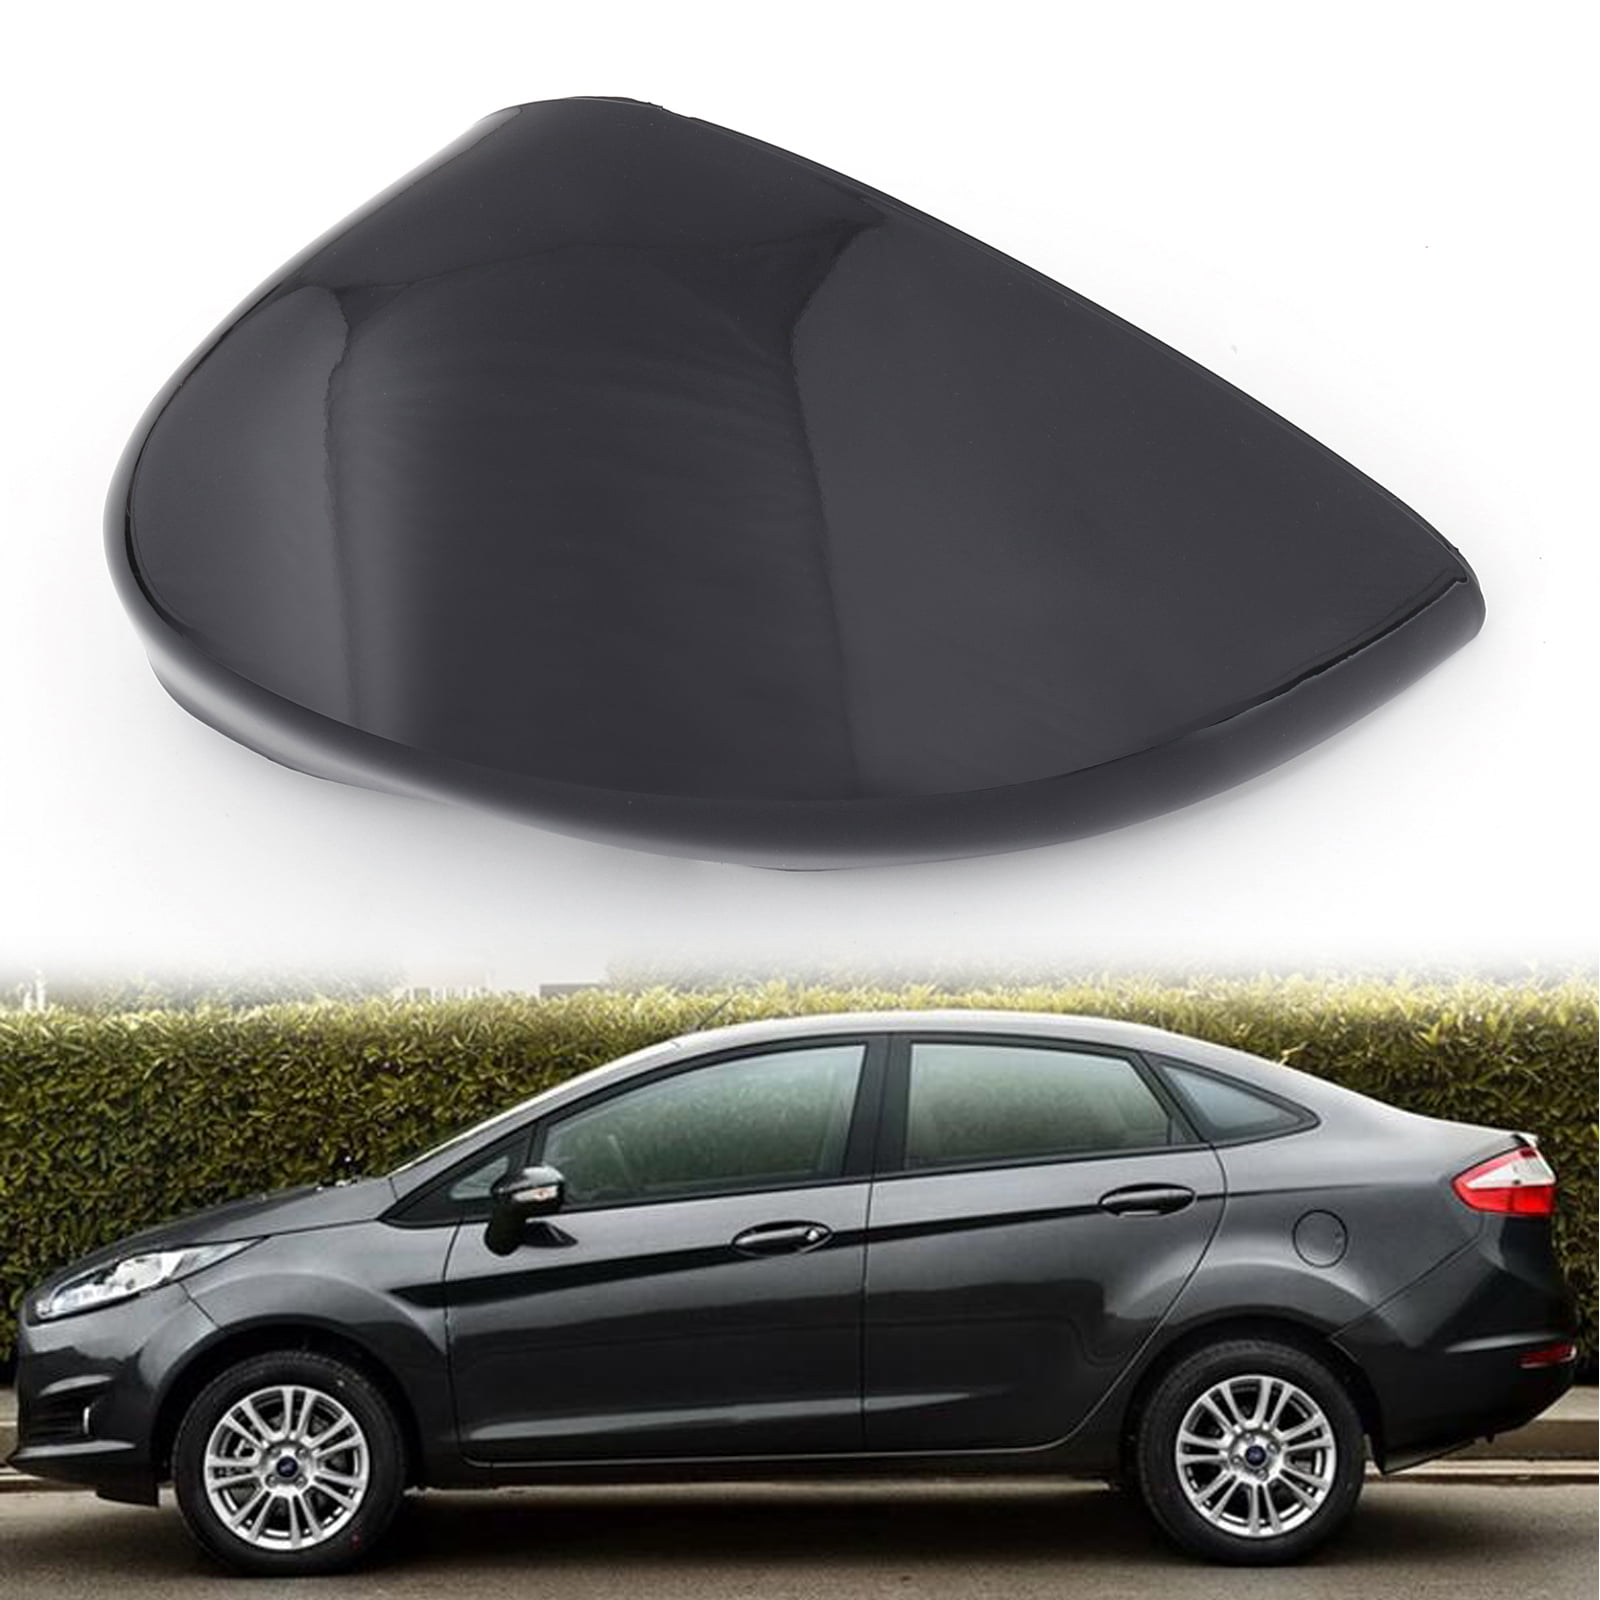 HAIQING Piano Sea Car Left Side Red Wing Door Mirror Cover Cap Fit For Ford Fiesta MK7 2008 2009 2010 2011 2012 2013 2014 2015 2016 2017 